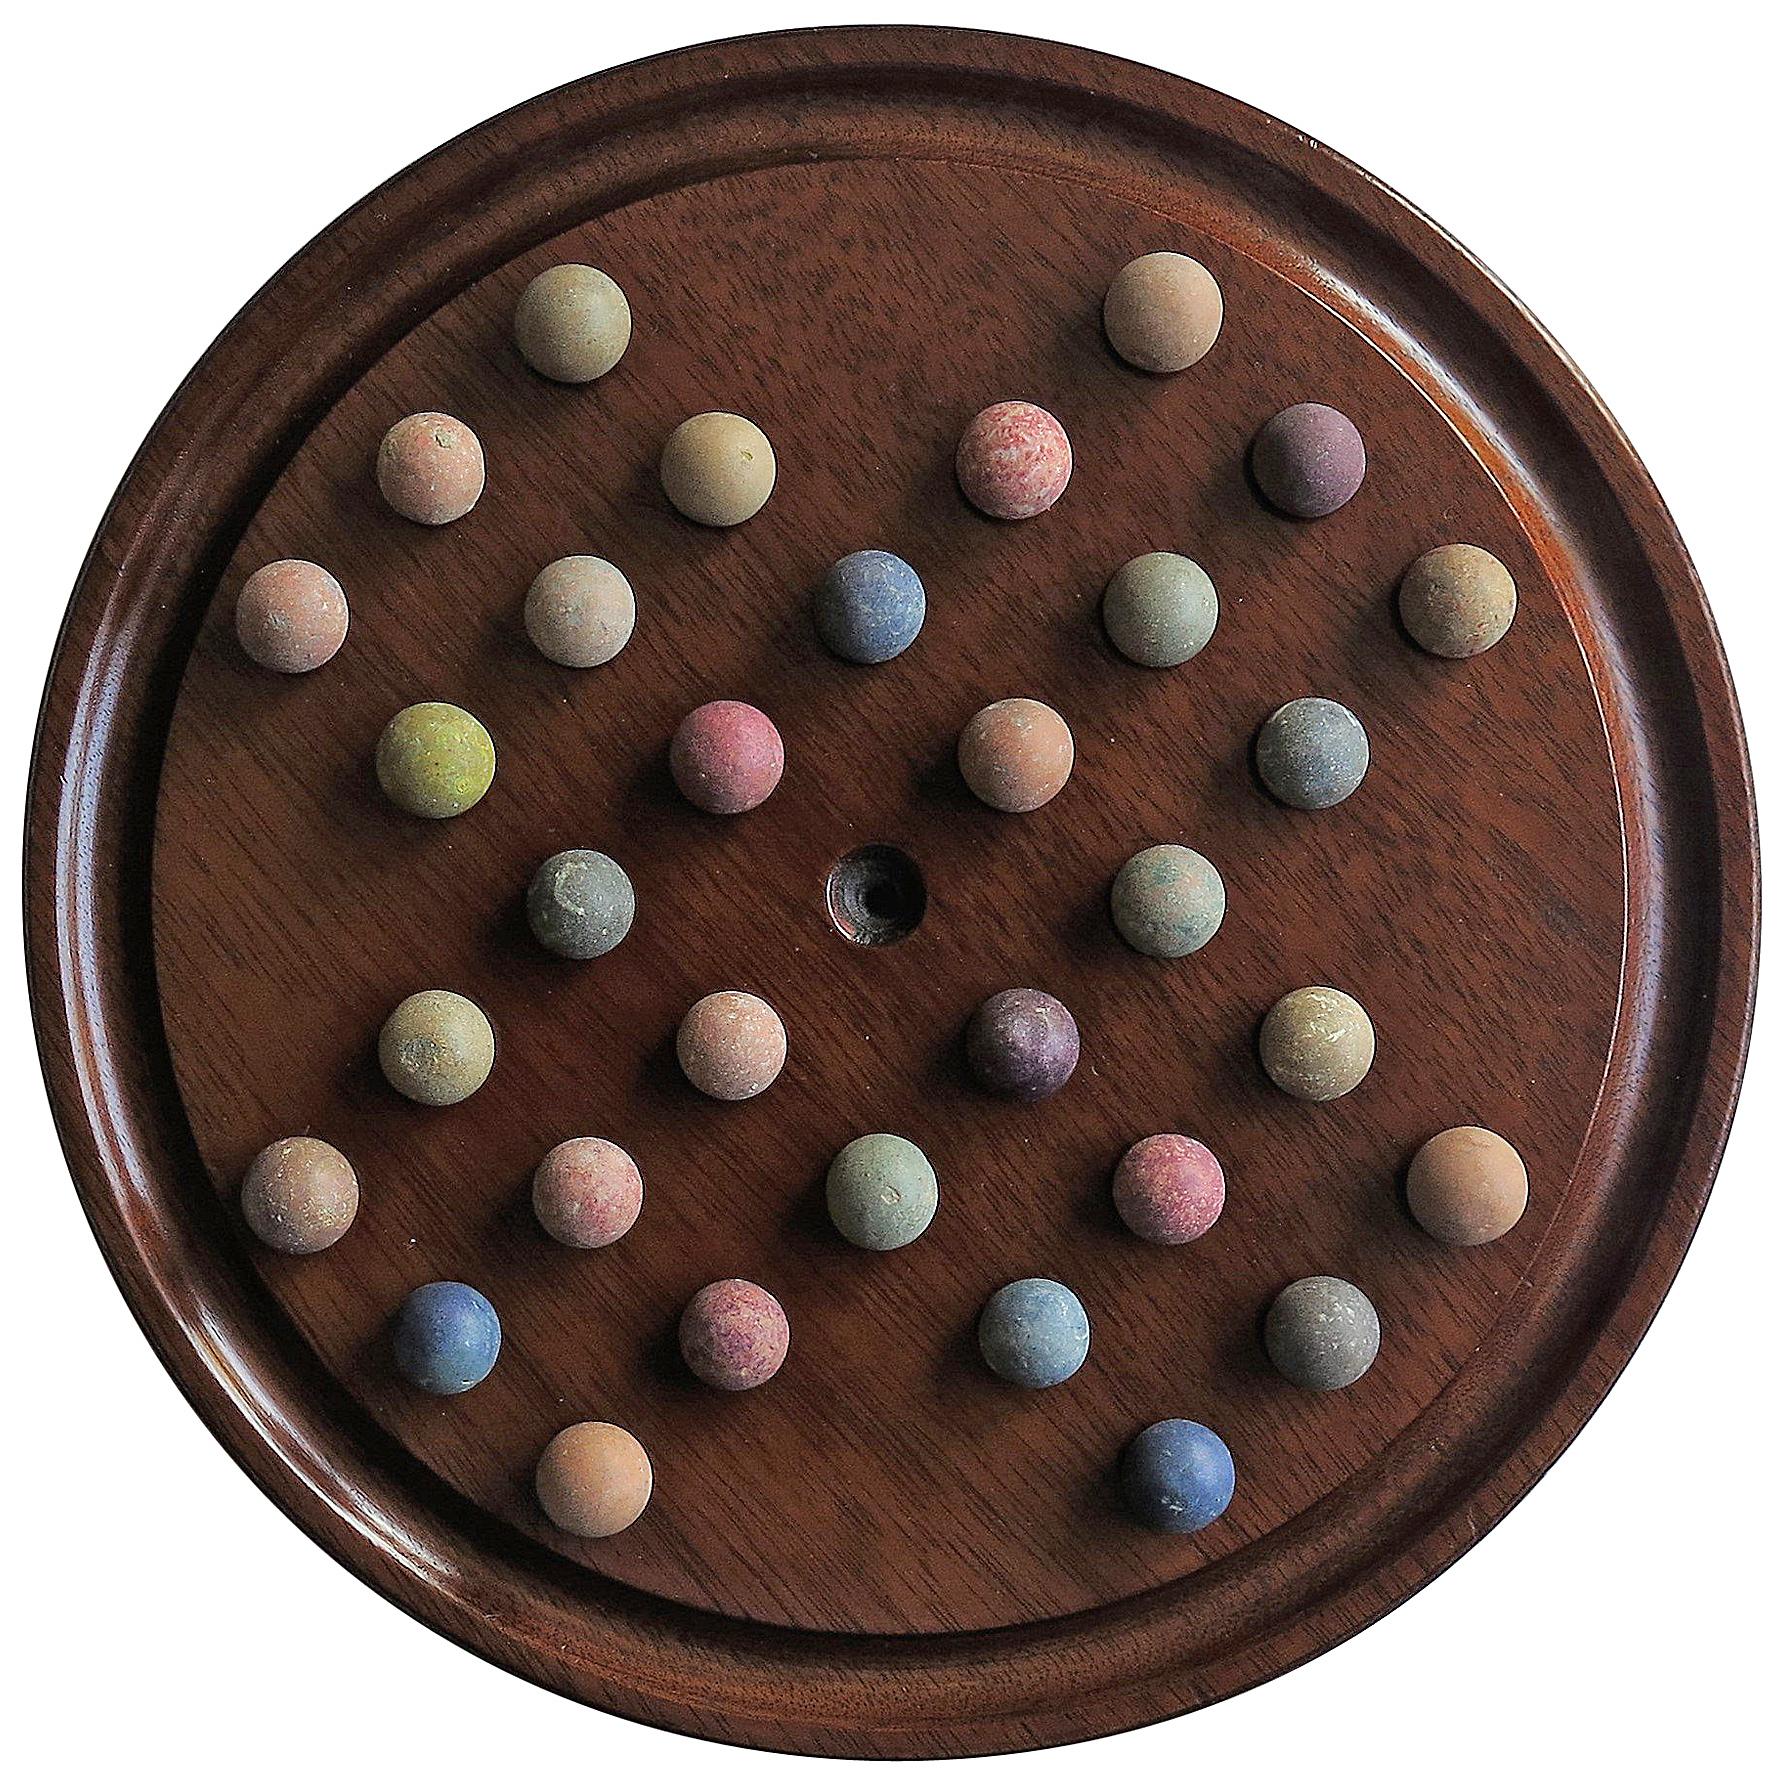 19th Century Marble Solitaire Game with Handmade Mahogany Board and 32 marbles